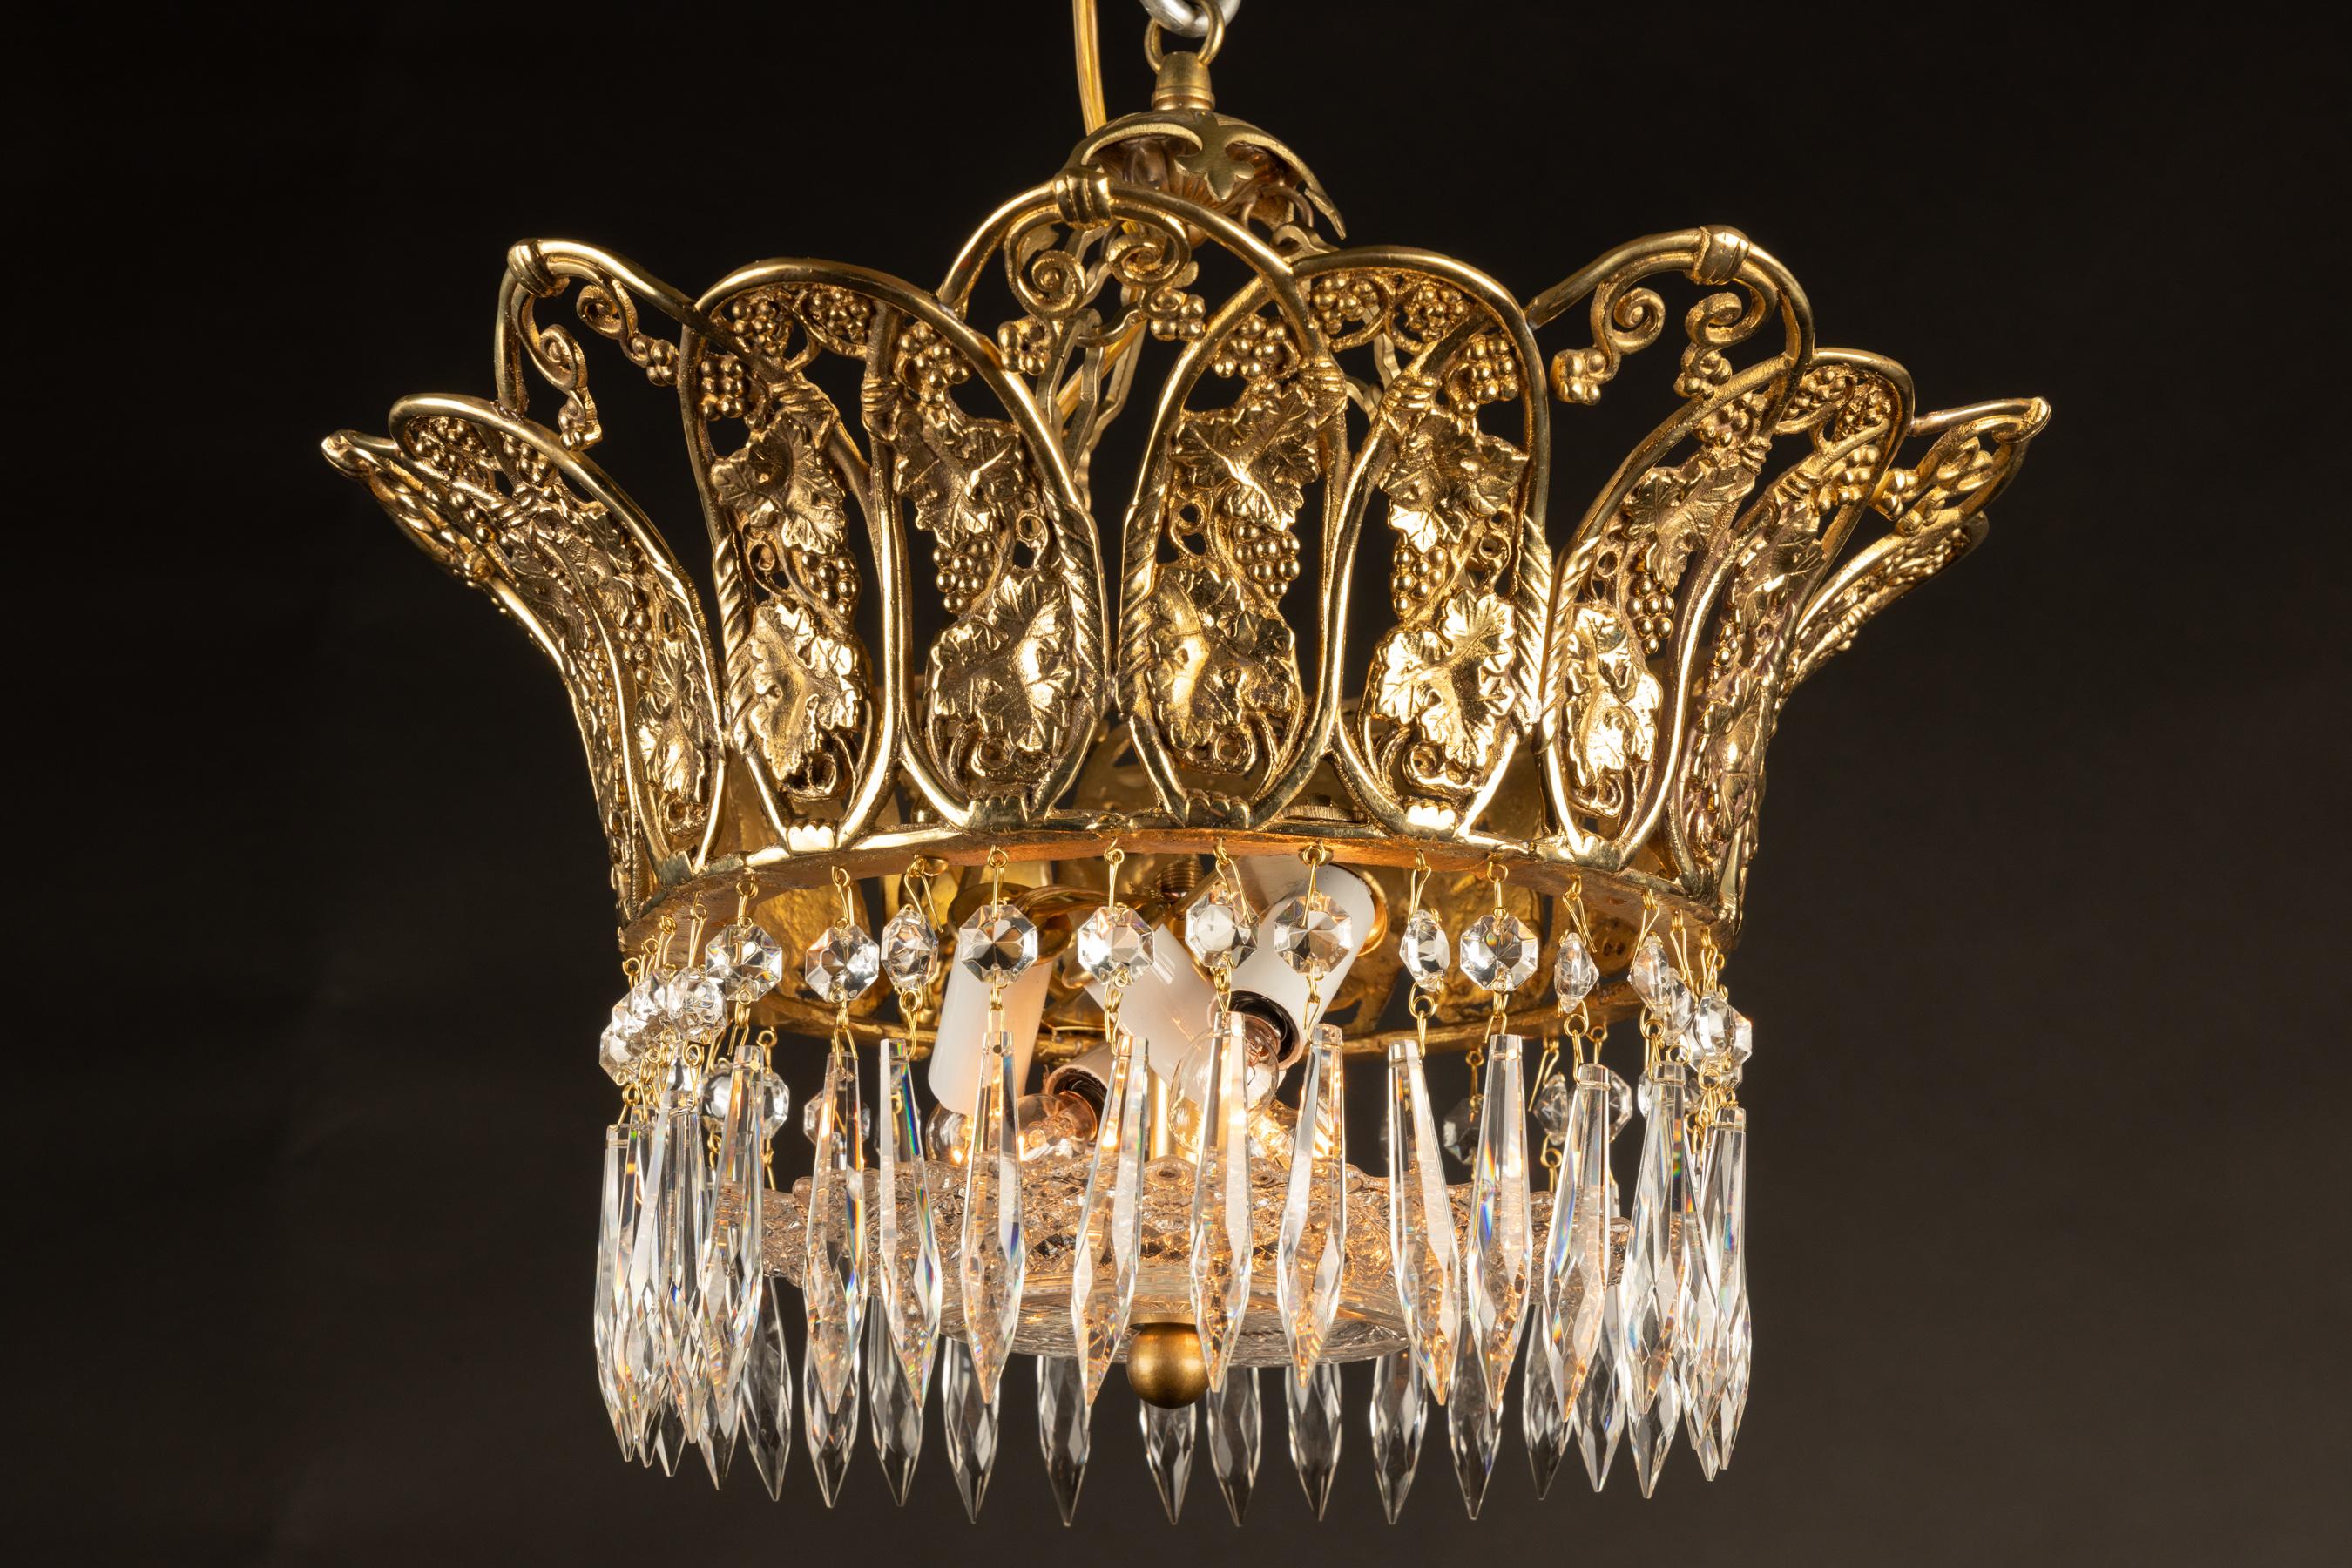 This beautiful early 20th century French chandelier features fantastic crystal work, a beautiful cut crystal center dish, and a delicately ornate crown. The crown features a grape motif, alluding to Bacchus the god of wine. Its bronze glimmers in